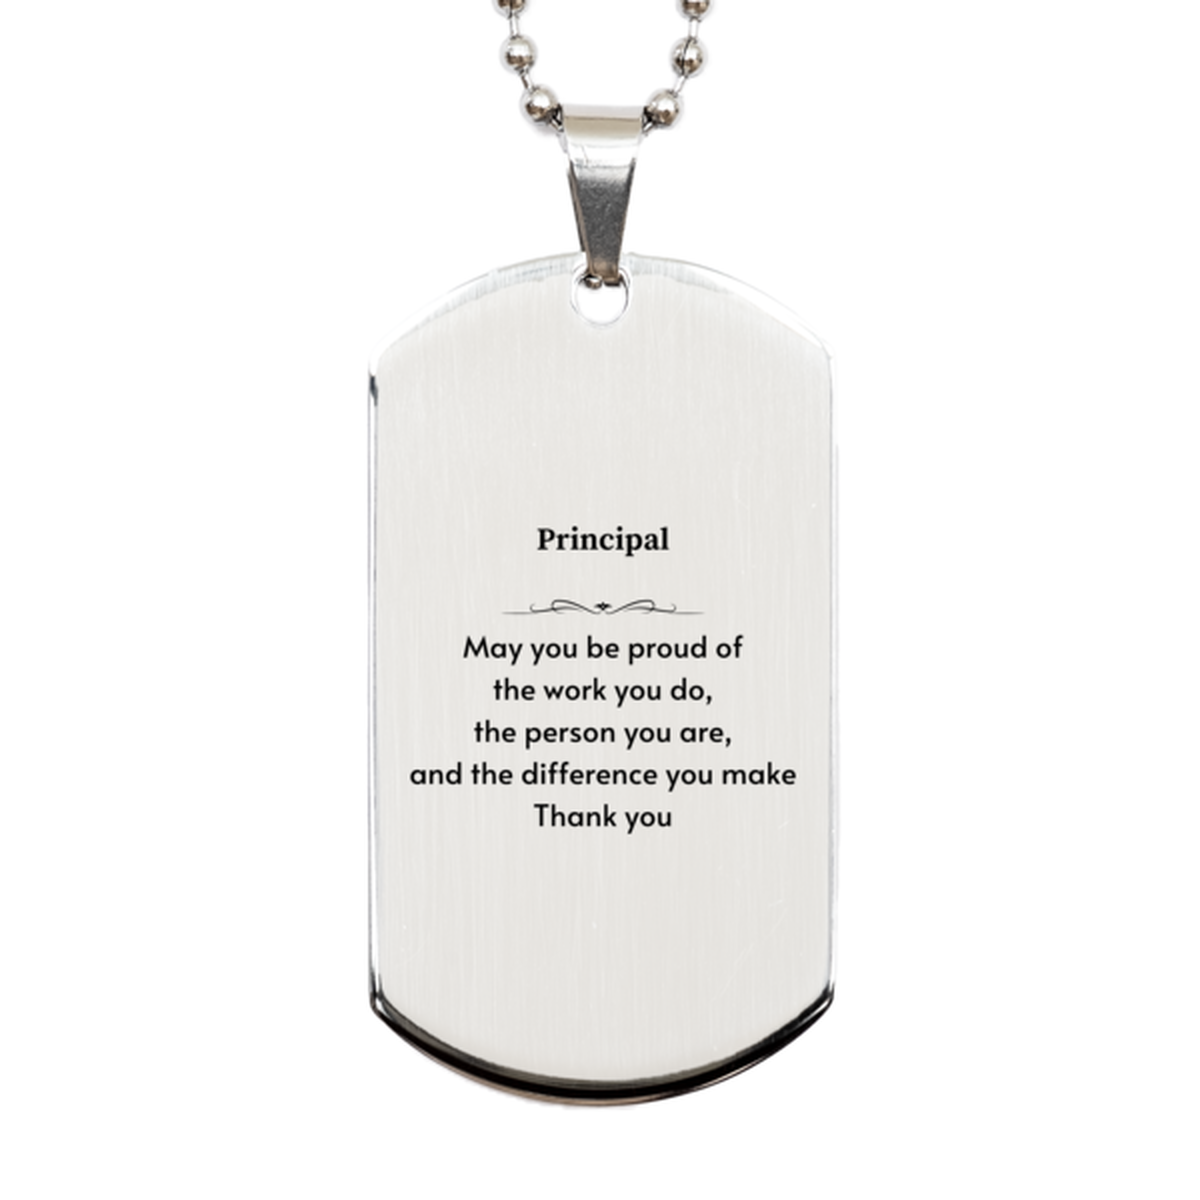 Heartwarming Silver Dog Tag Retirement Coworkers Gifts for Principal, Principal May You be proud of the work you do, the person you are Gifts for Boss Men Women Friends